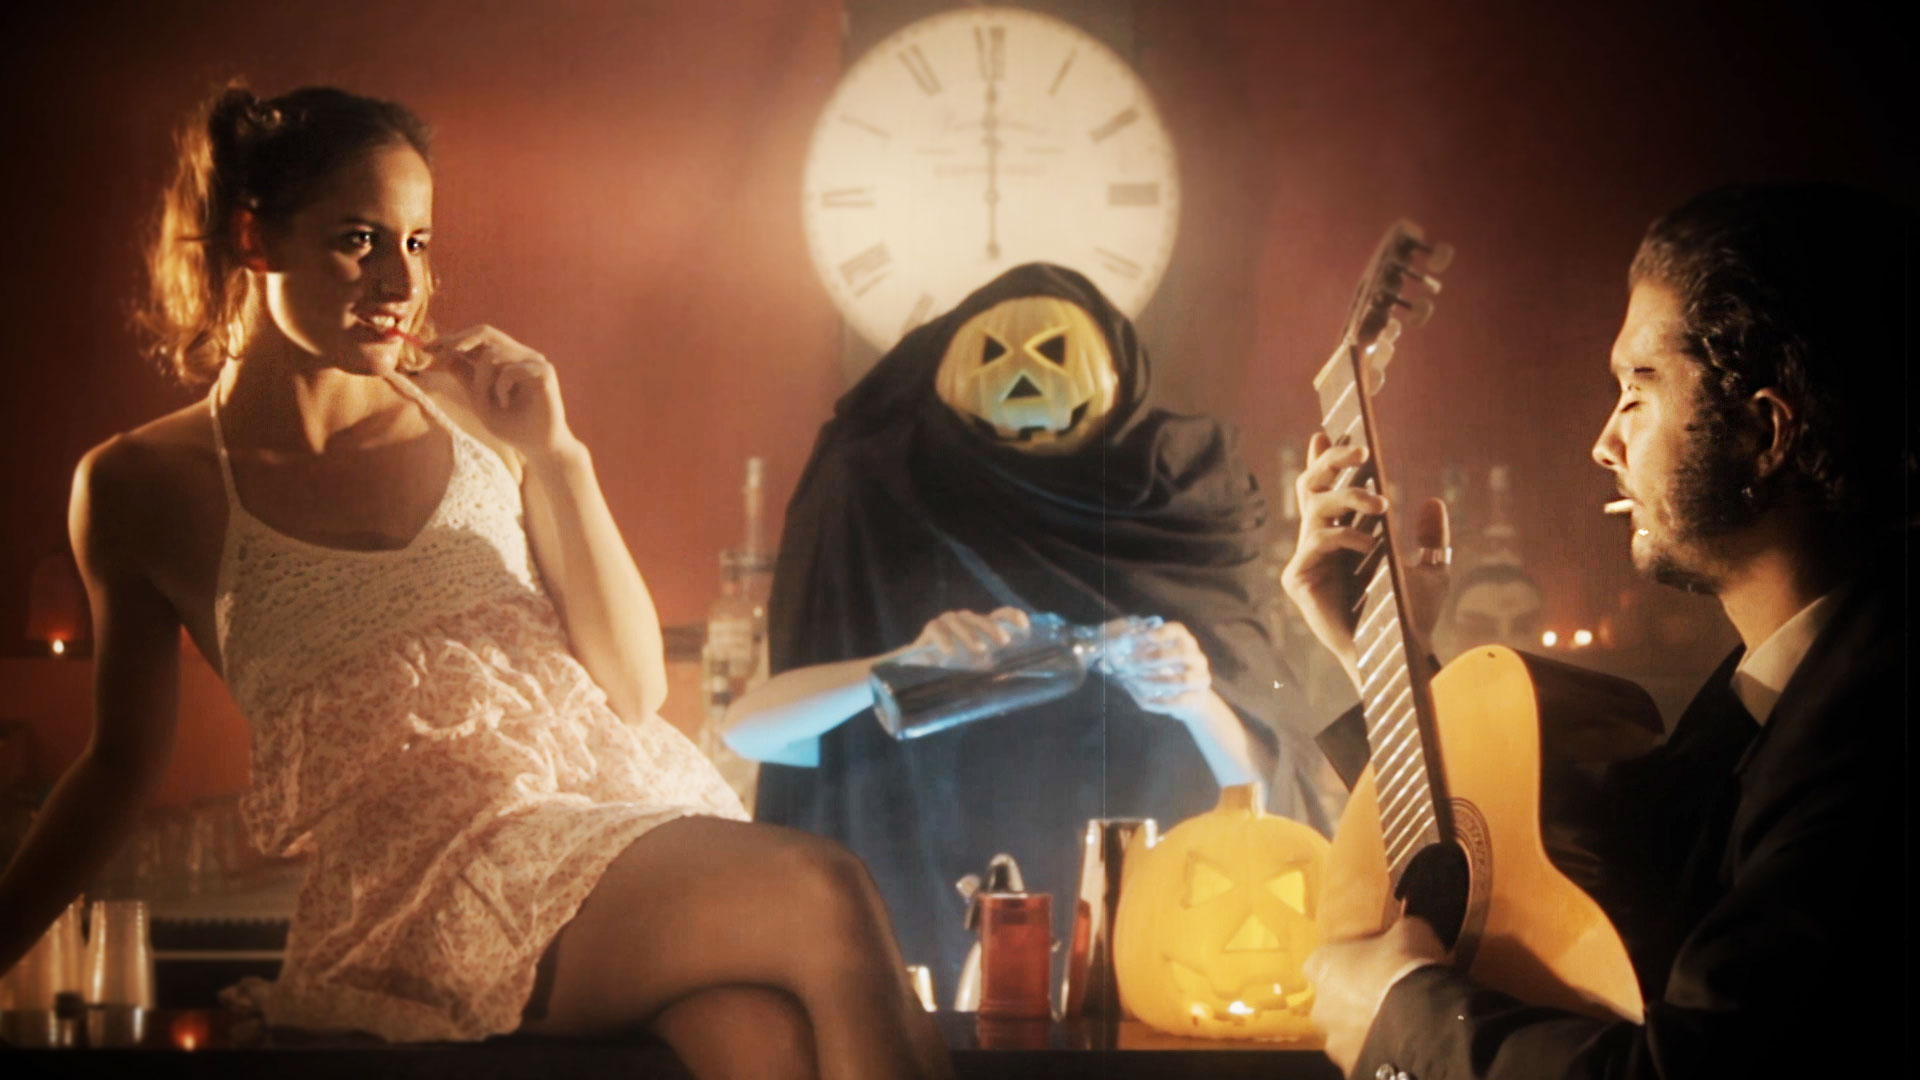 Preview of the trouble video production: "AGORA' - HALLOWEEN"